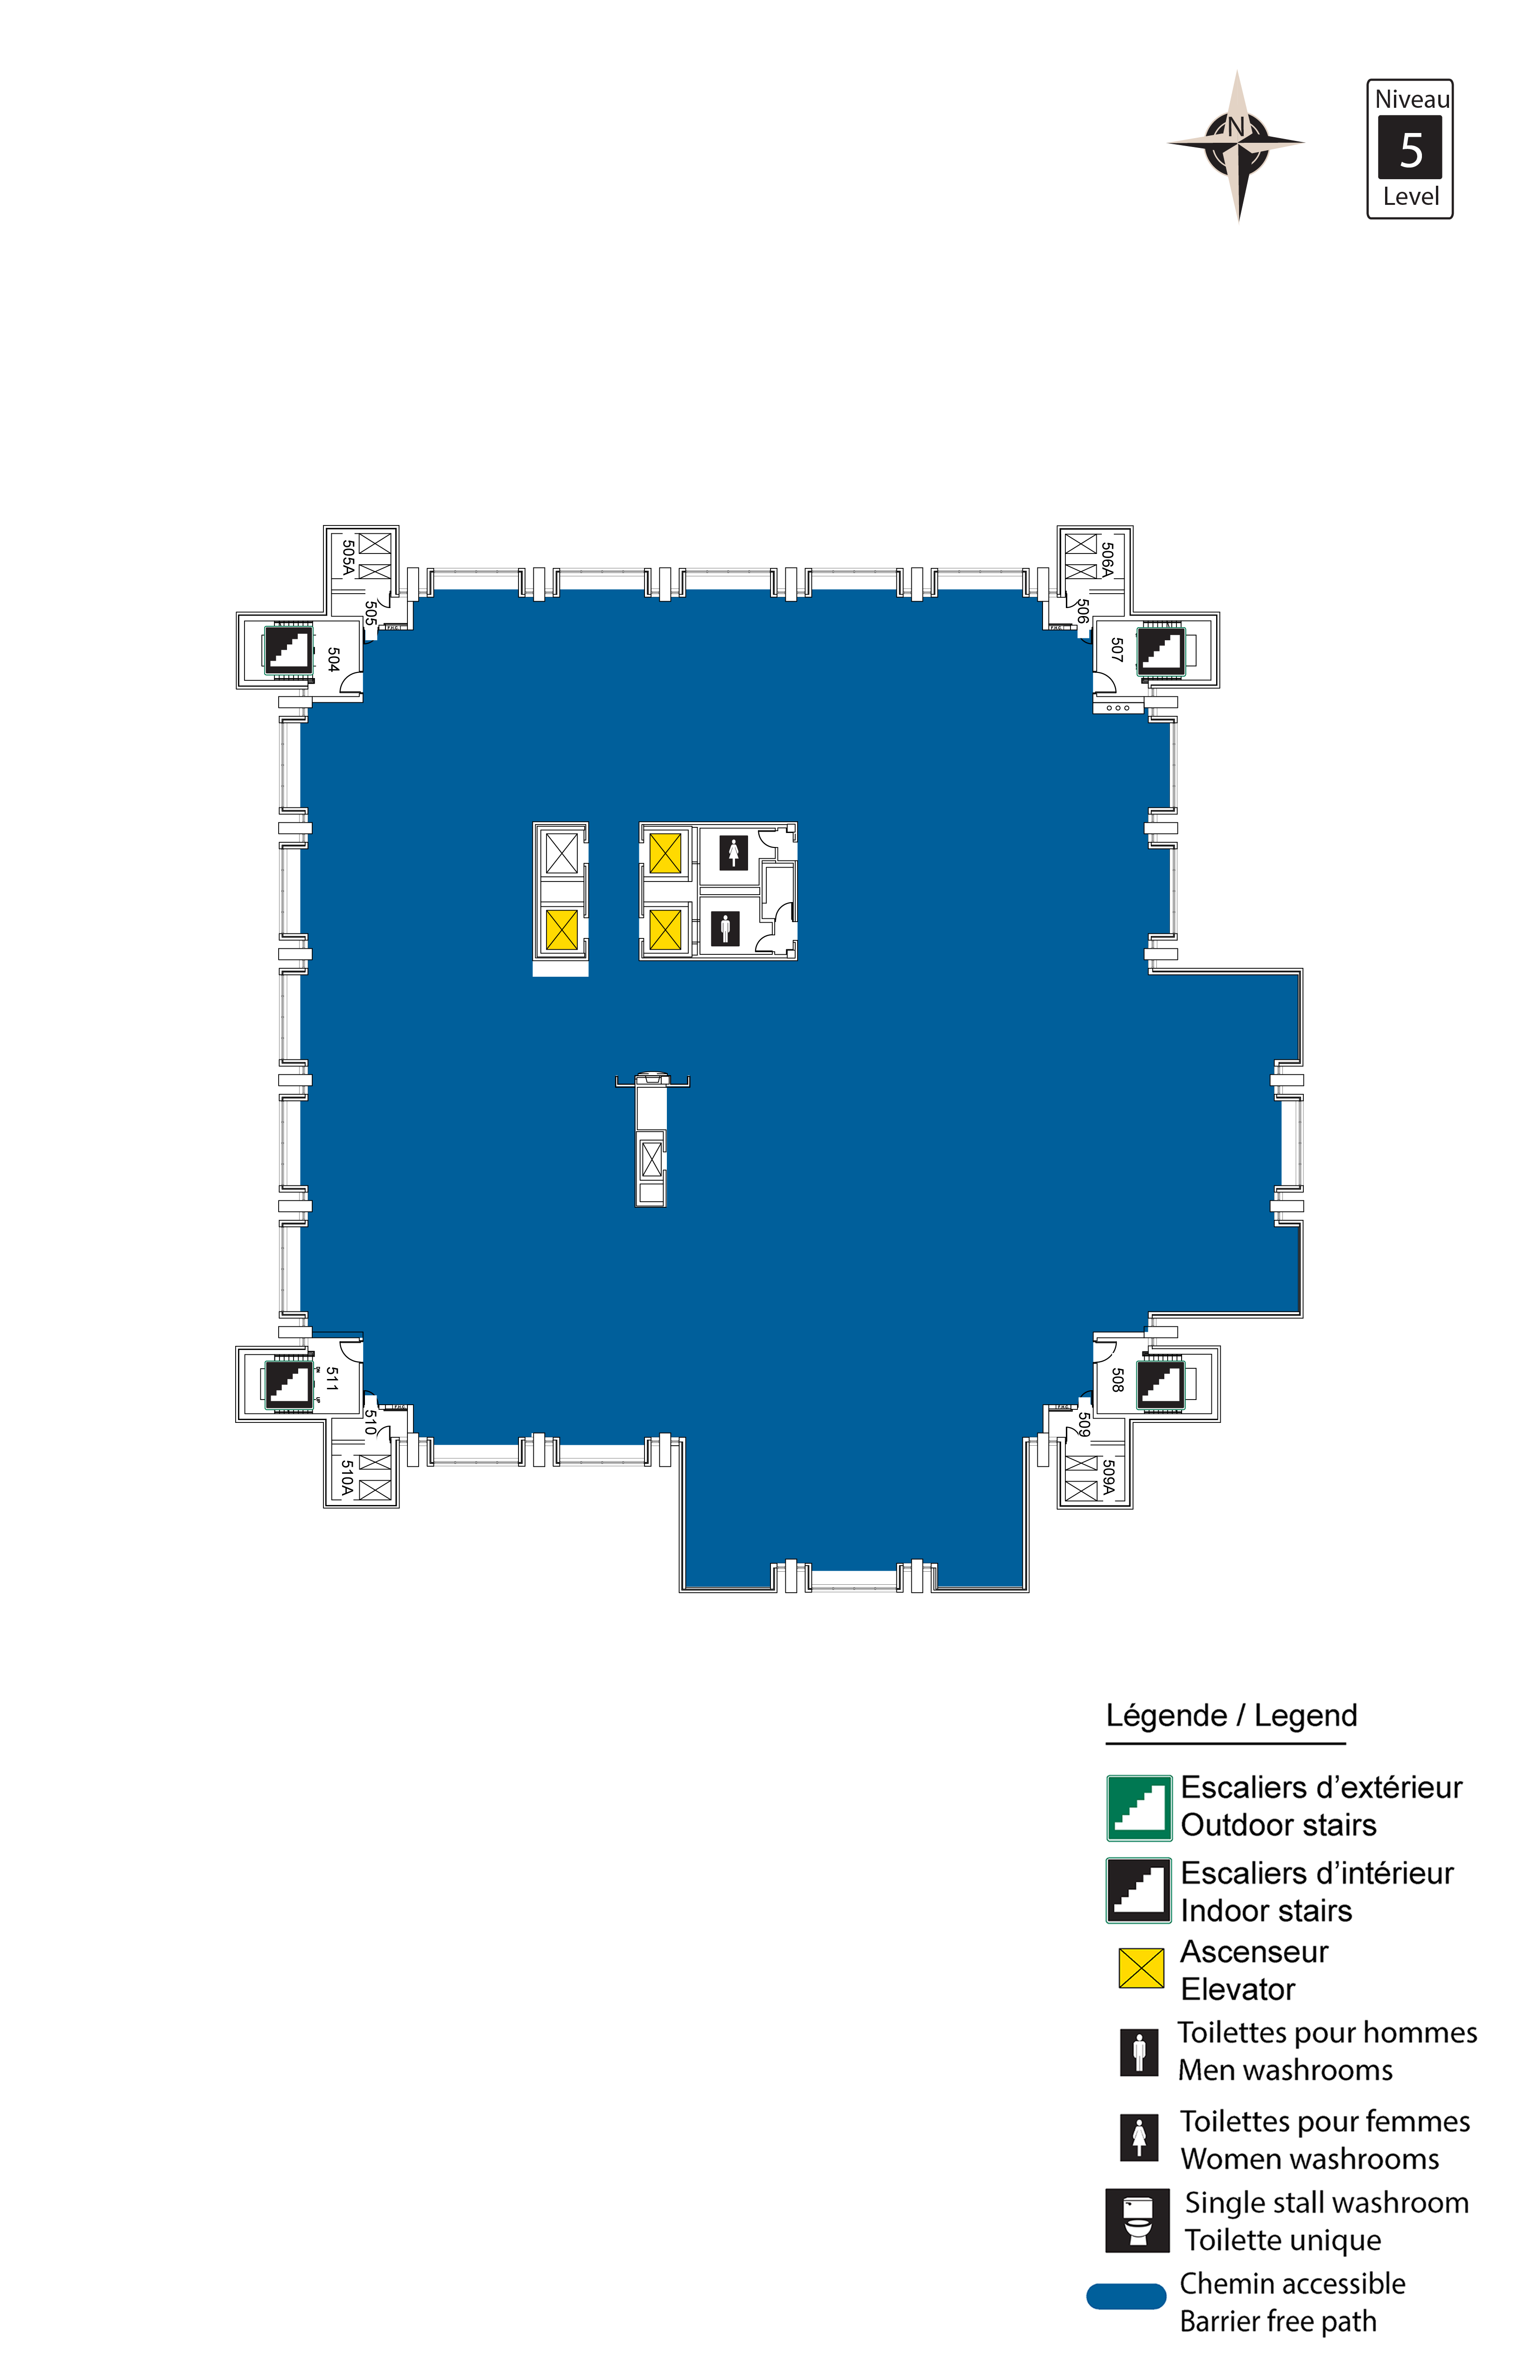 Accessible map of Morisset level 5